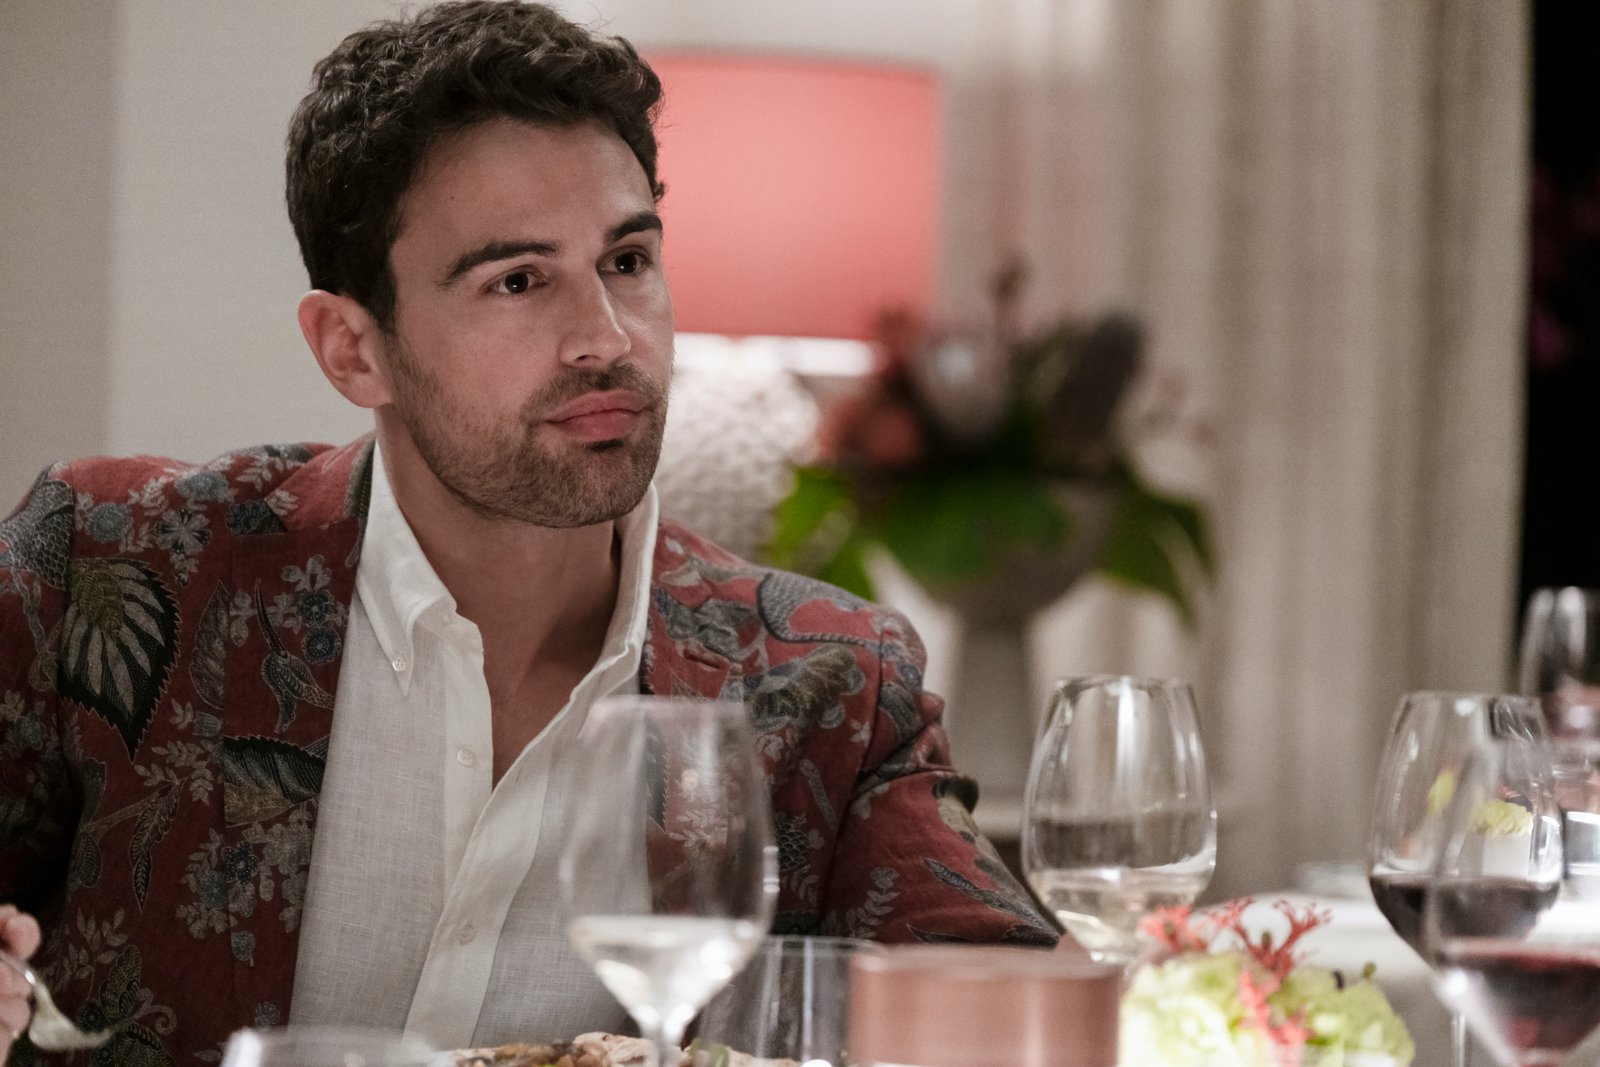 Theo James as Cameron Sullivan in 'The White Lotus' Season 2. He's sitting at a table, wearing a white shirt and red and green jacket, and looks annoyed.